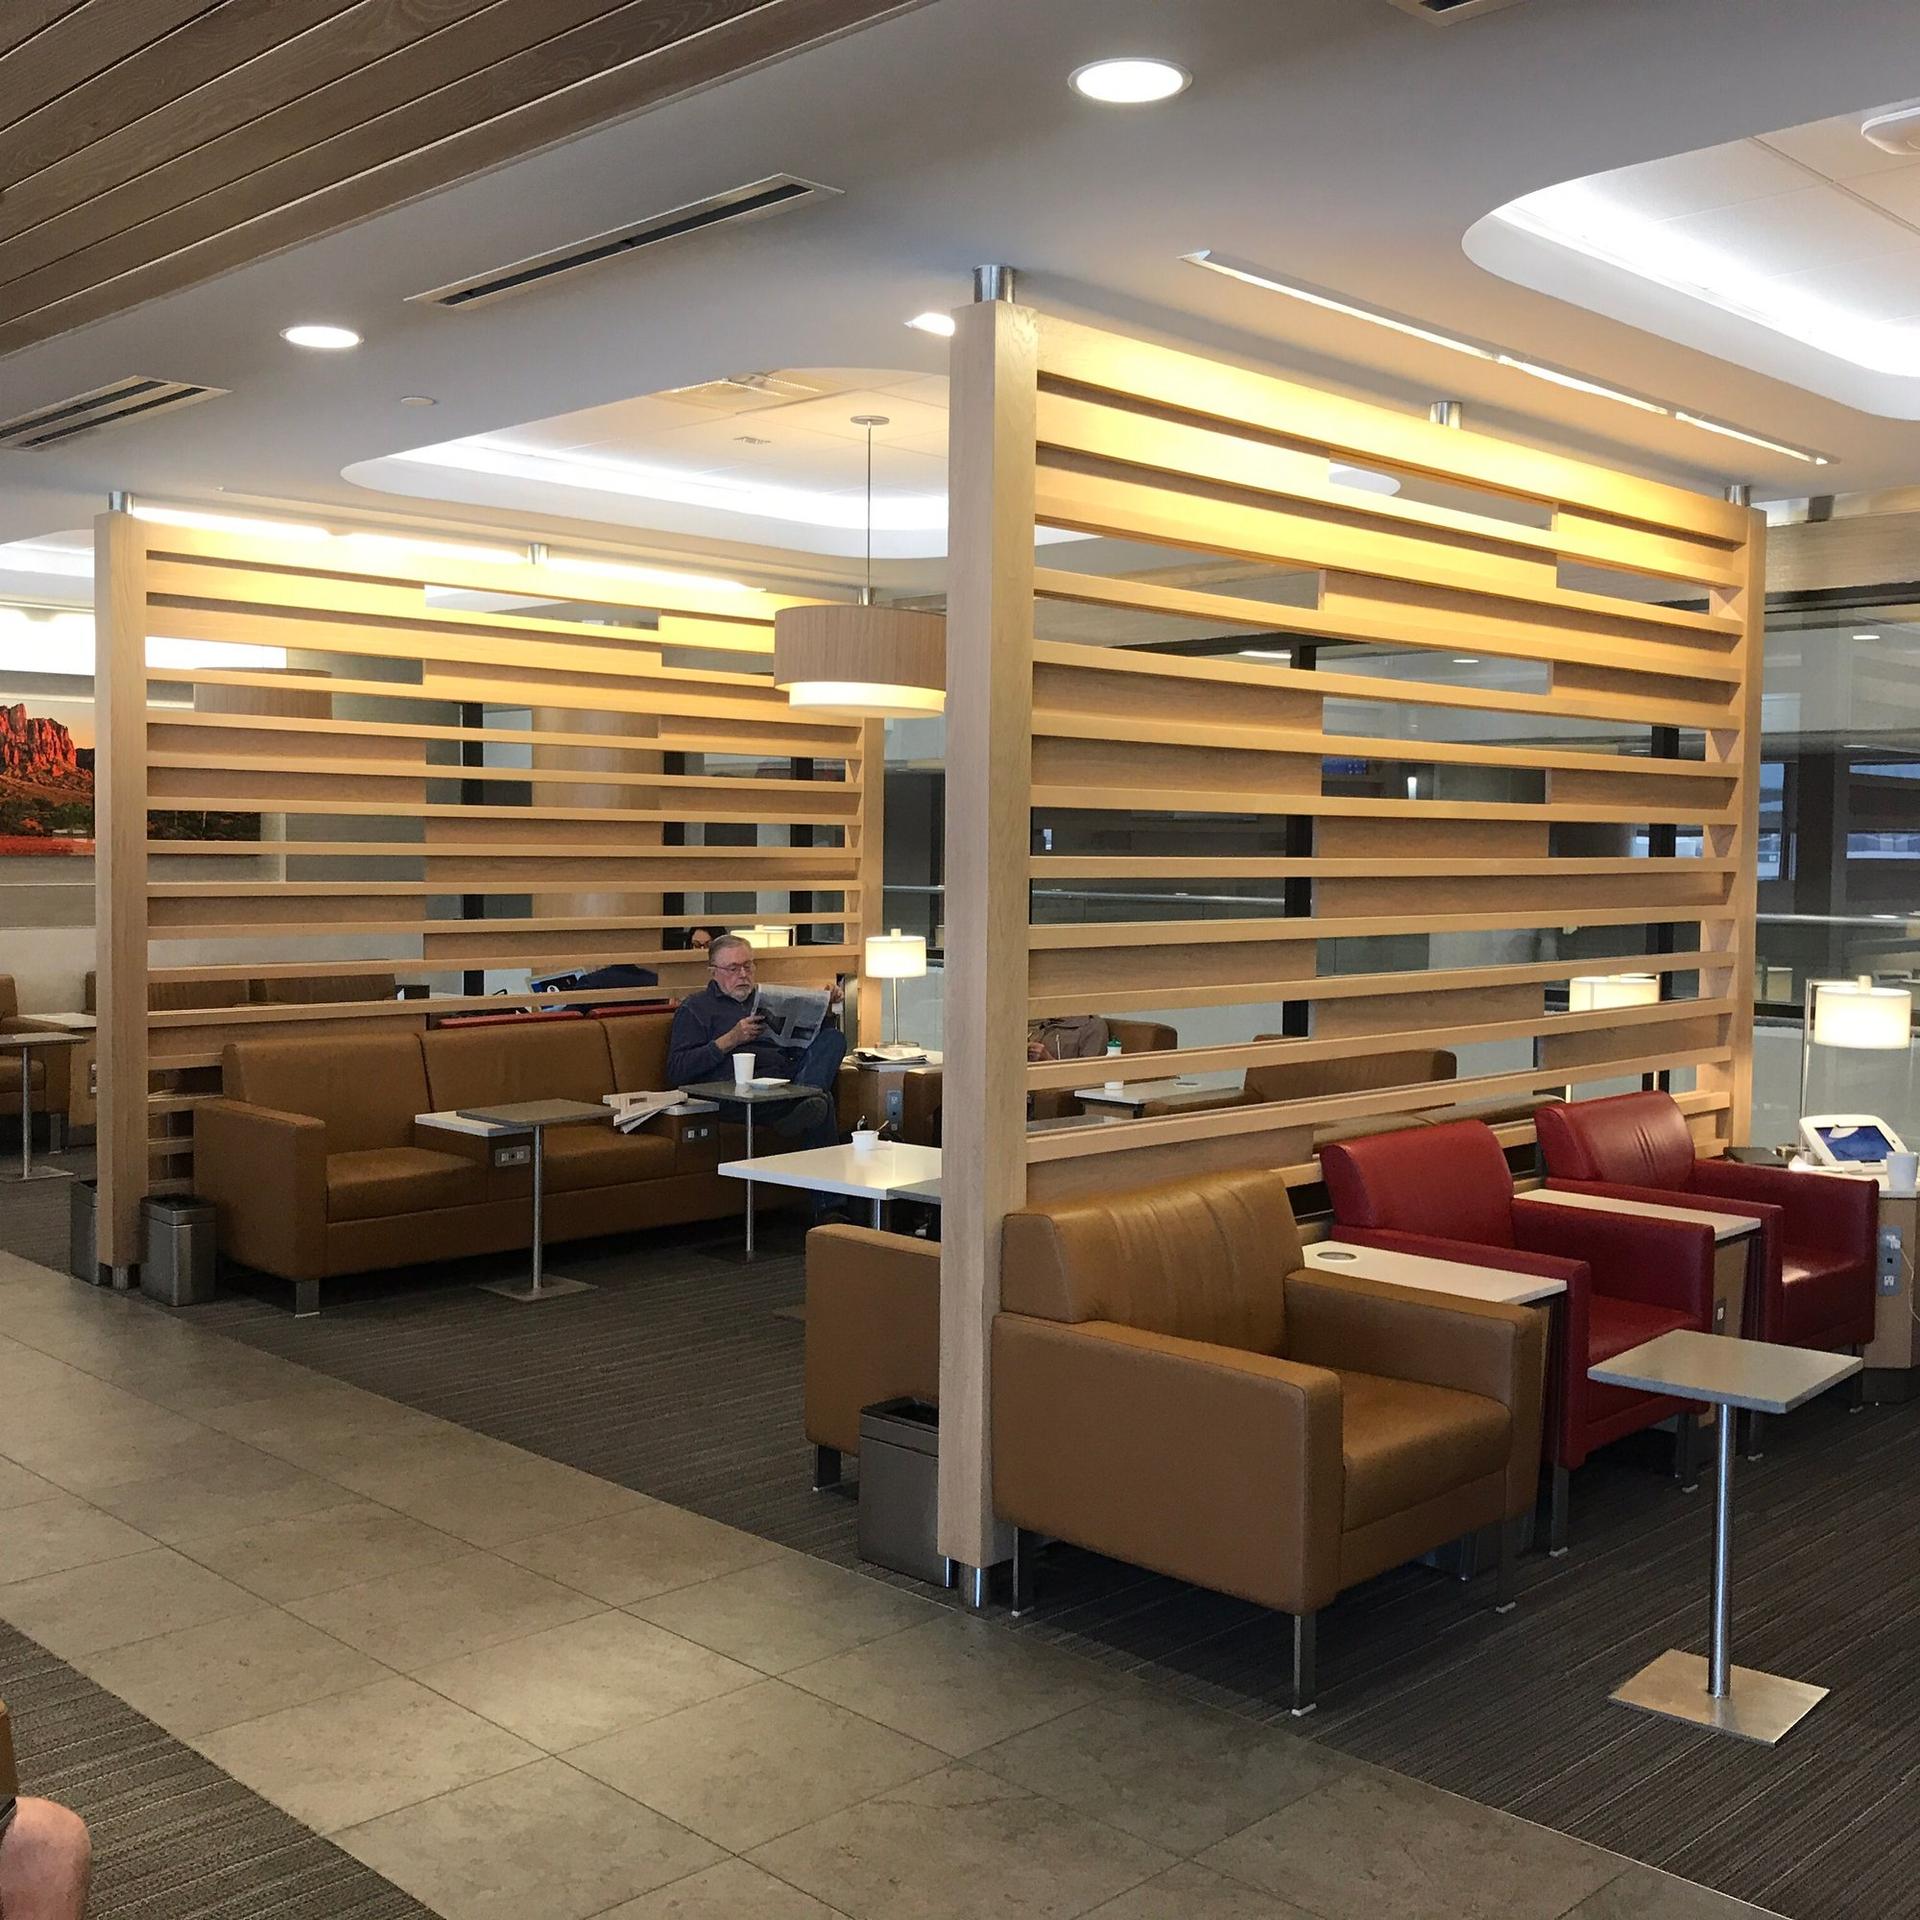 American Airlines Admirals Club PHX (Gate A19) - Review